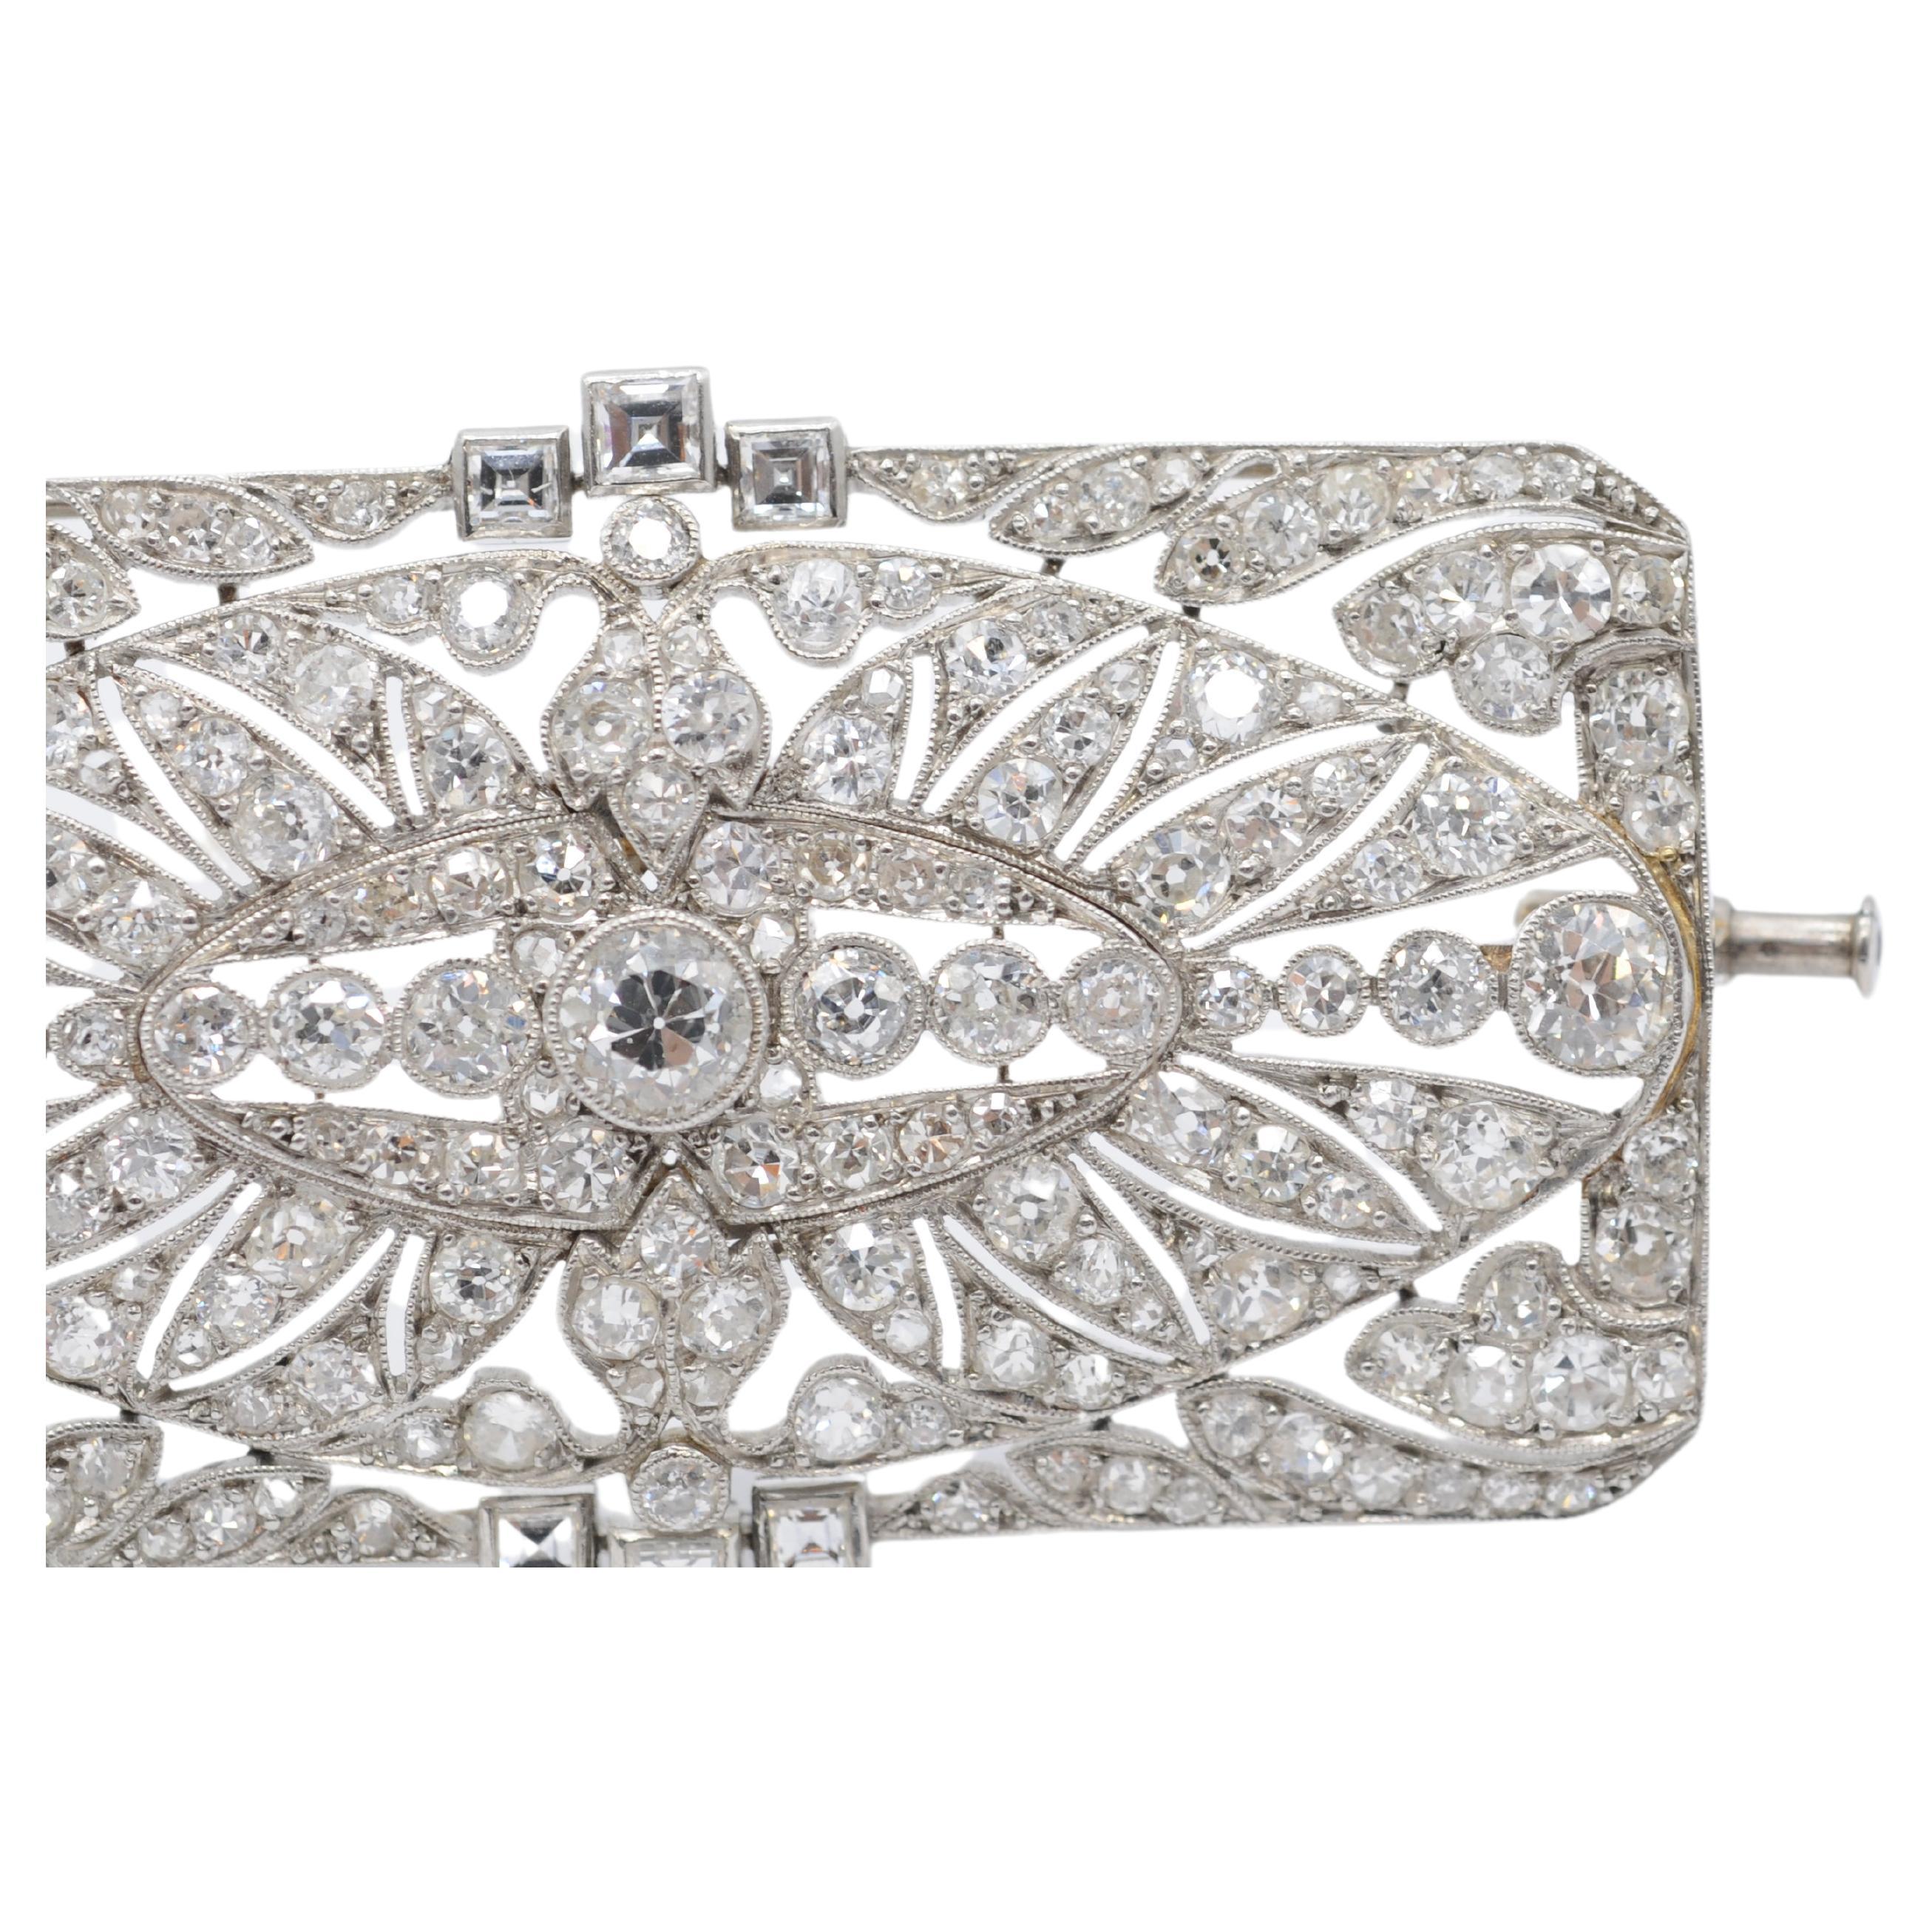 Art deco brooch with 170 diamonds in Old European cut noble platinum  For Sale 6